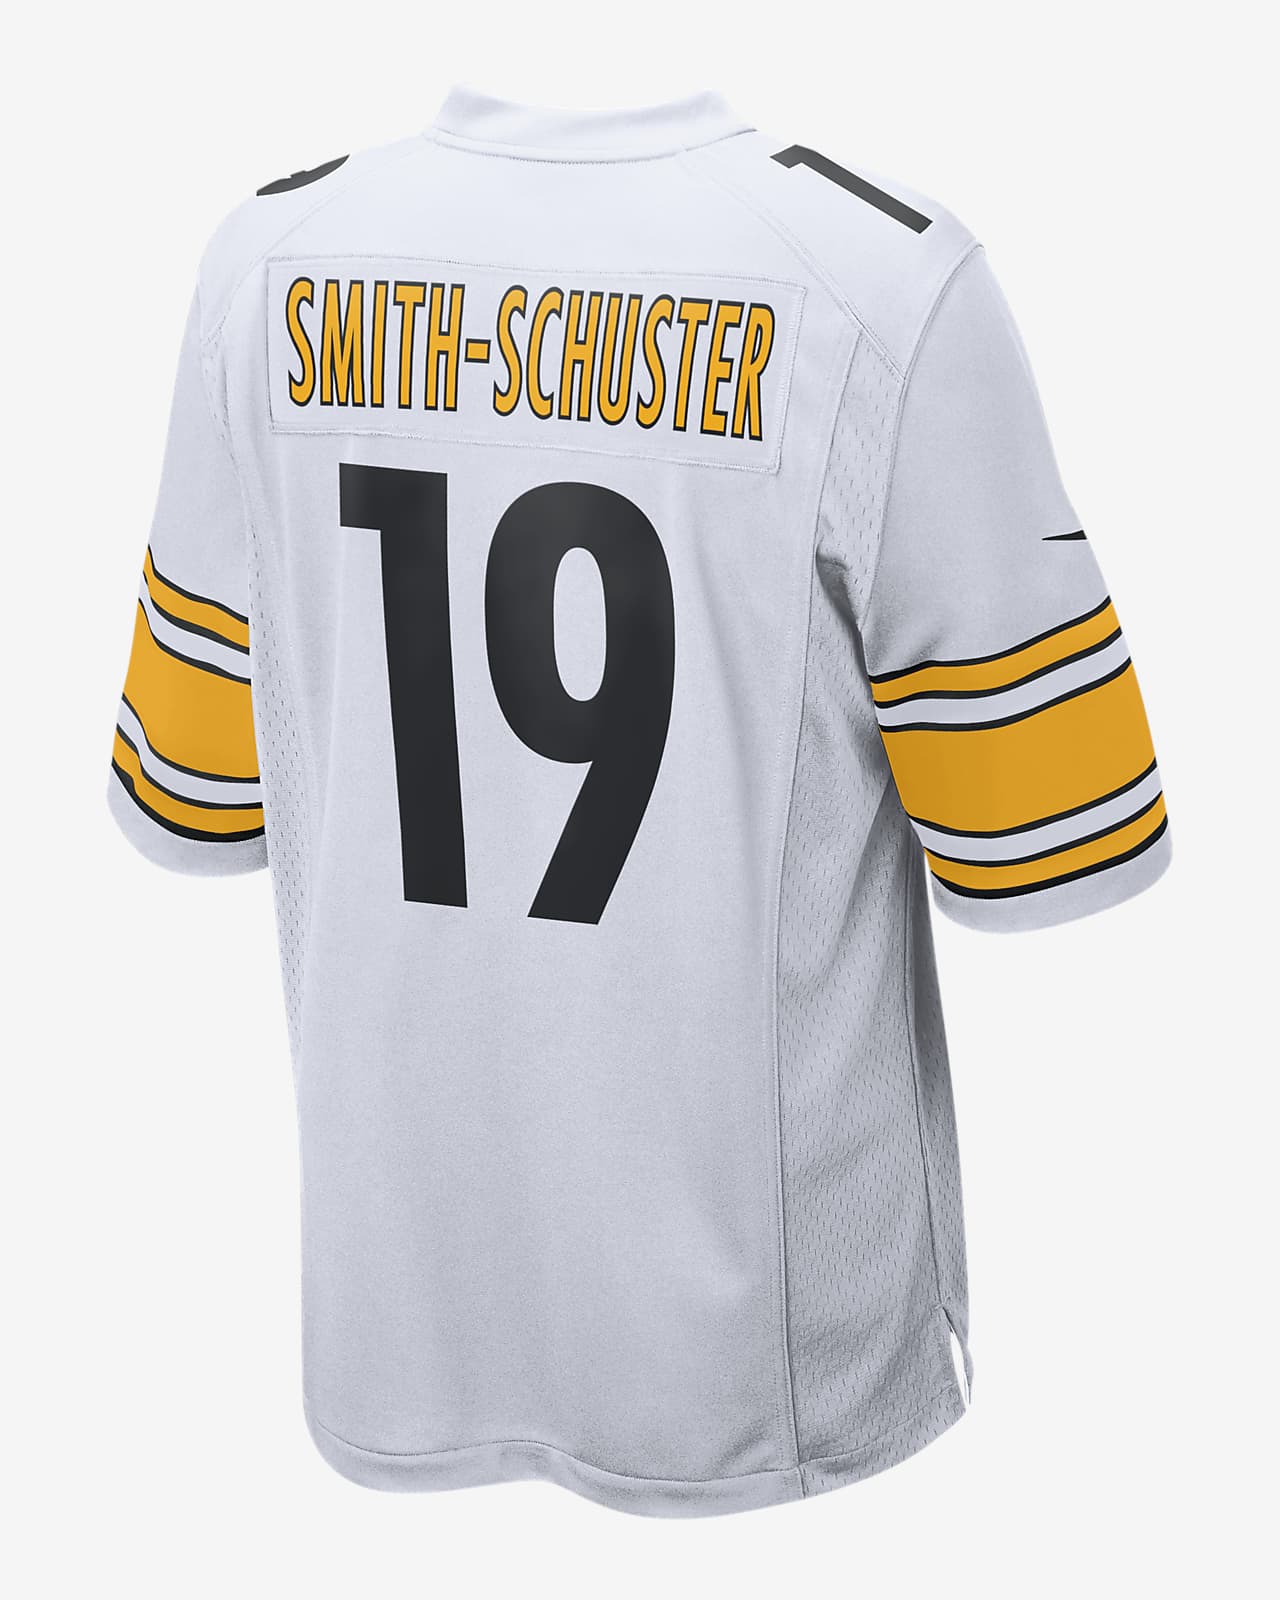 steelers number 10 jersey